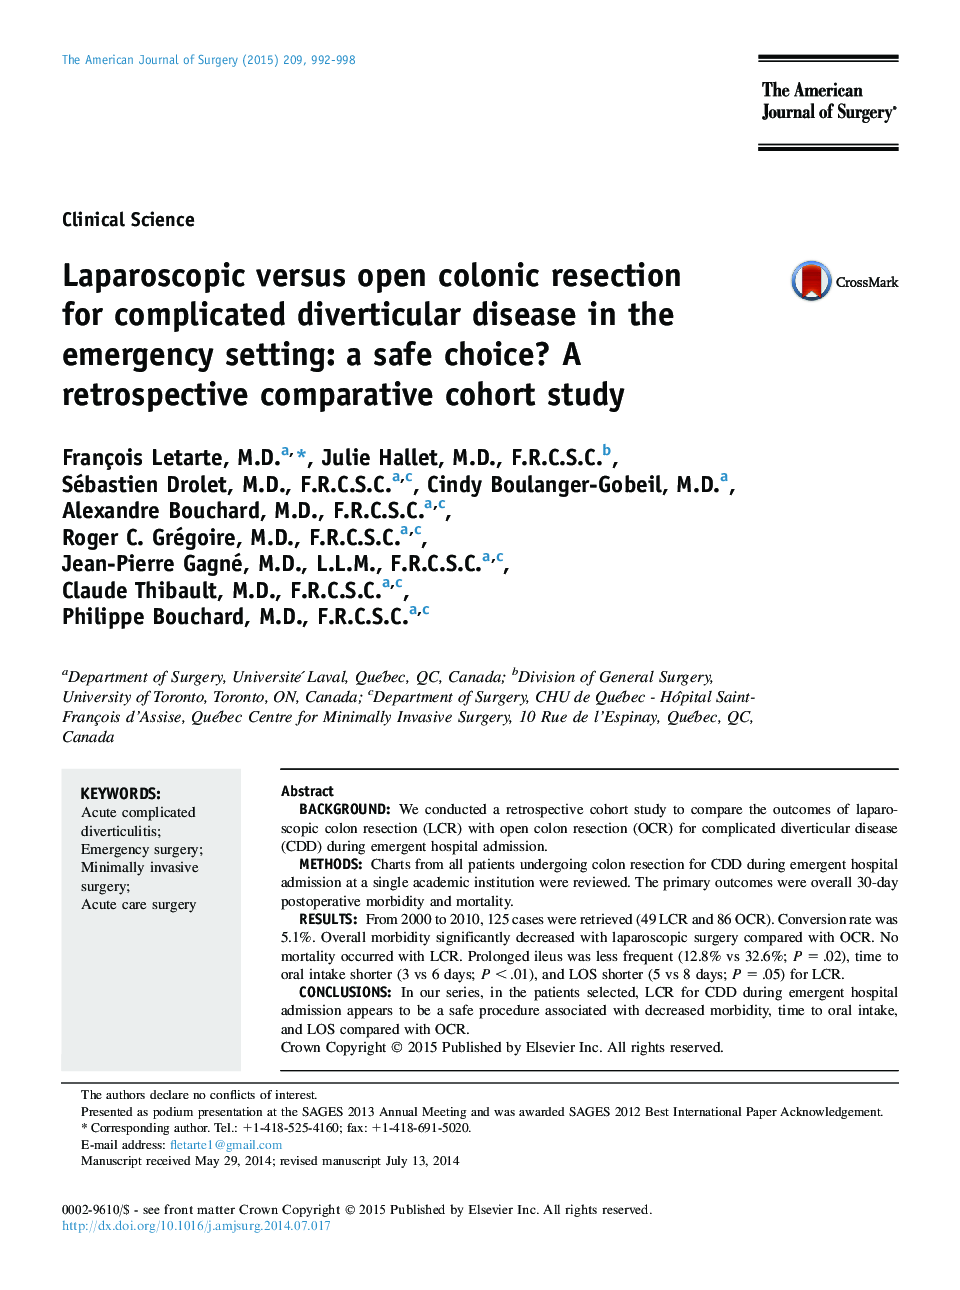 Clinical ScienceLaparoscopic versus open colonic resection forÂ complicated diverticular disease in the emergency setting: a safe choice? A retrospective comparative cohort study